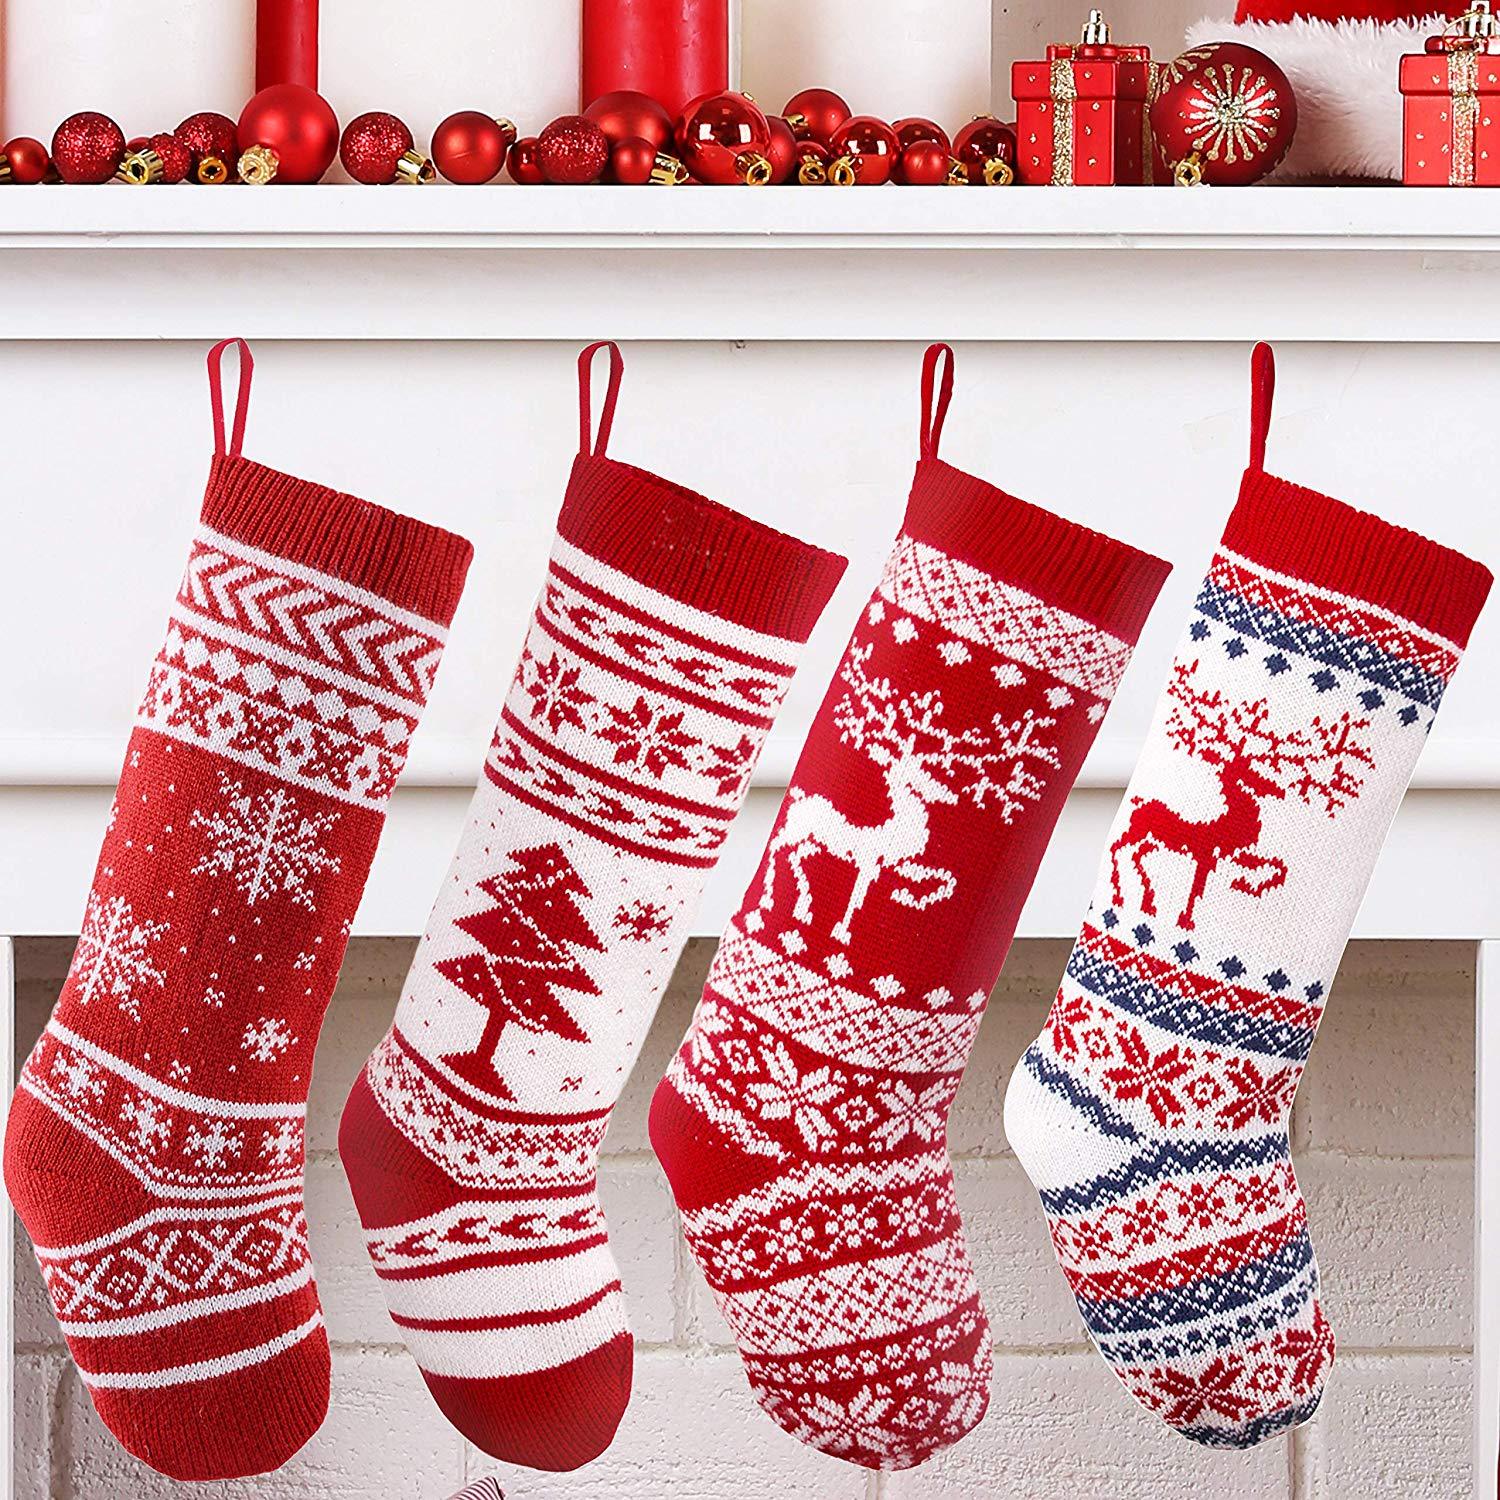 15″ Knit Stockings, 4 Pack